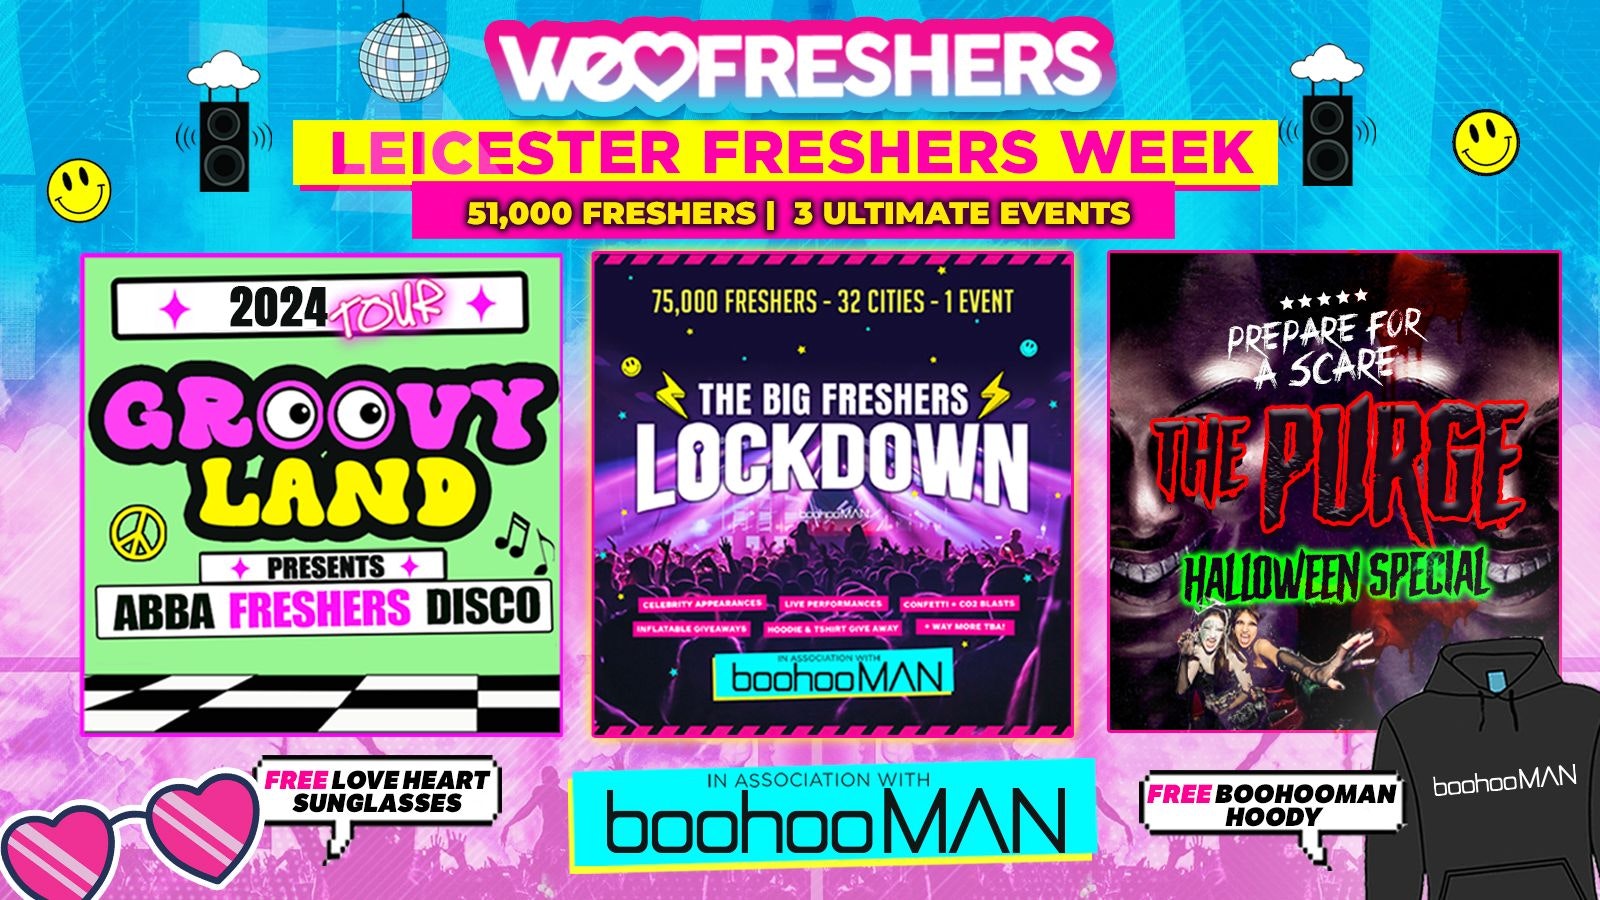 WE LOVE LEICESTER FRESHERS 2024 in association with boohooMAN ❗FREE BOOHOOMAN HOODIE TODAY ONLY❗